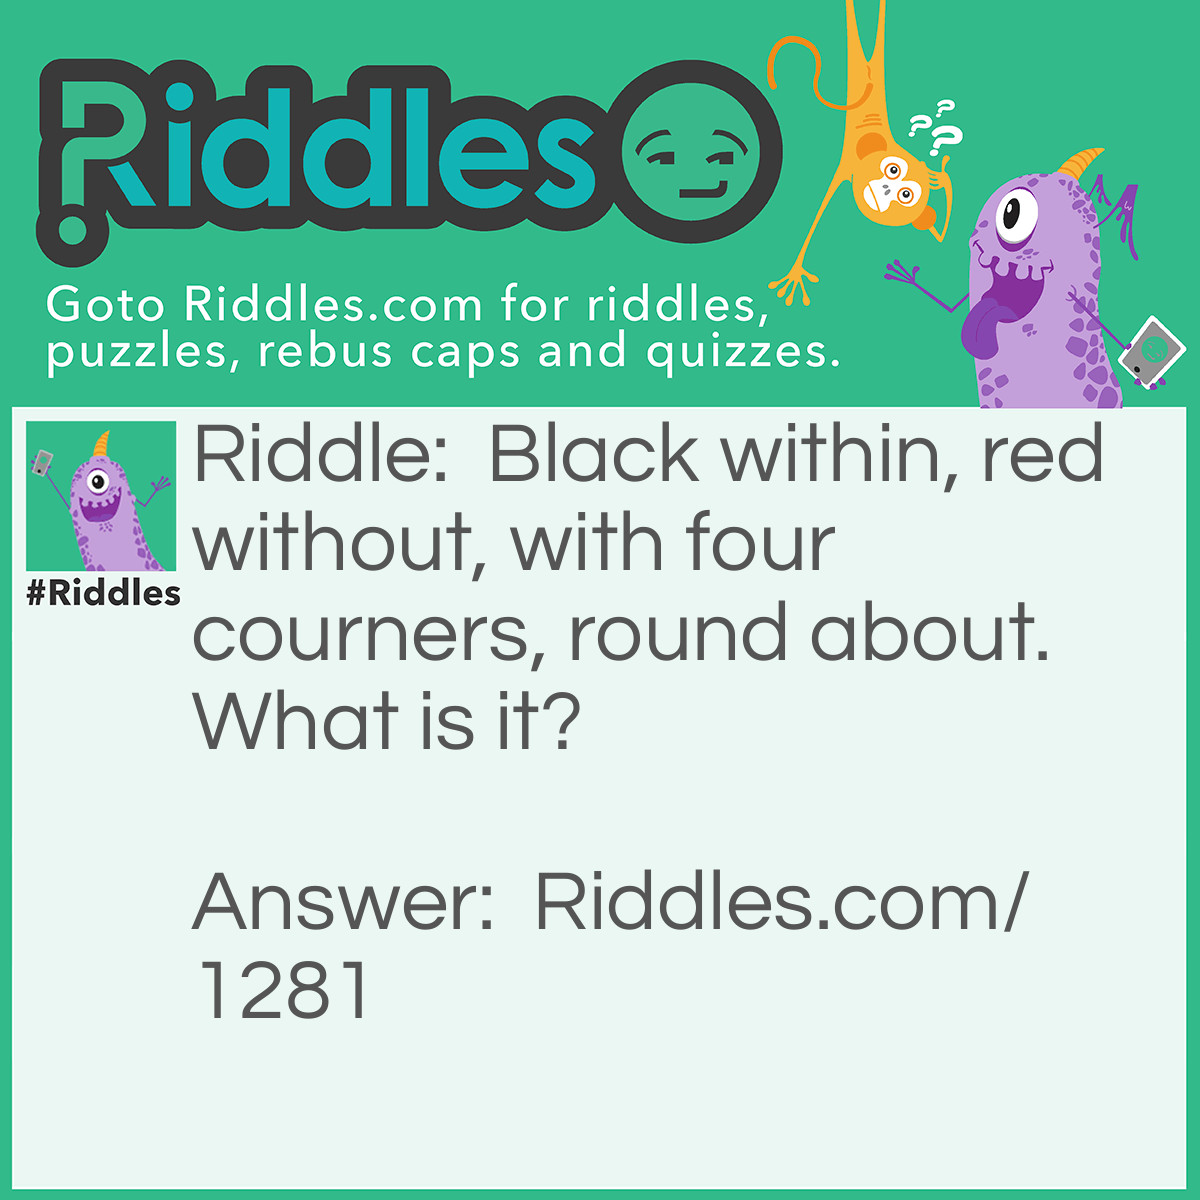 Riddle: Black within, red without, with four courners, round about. What is it? Answer: A chiminey.